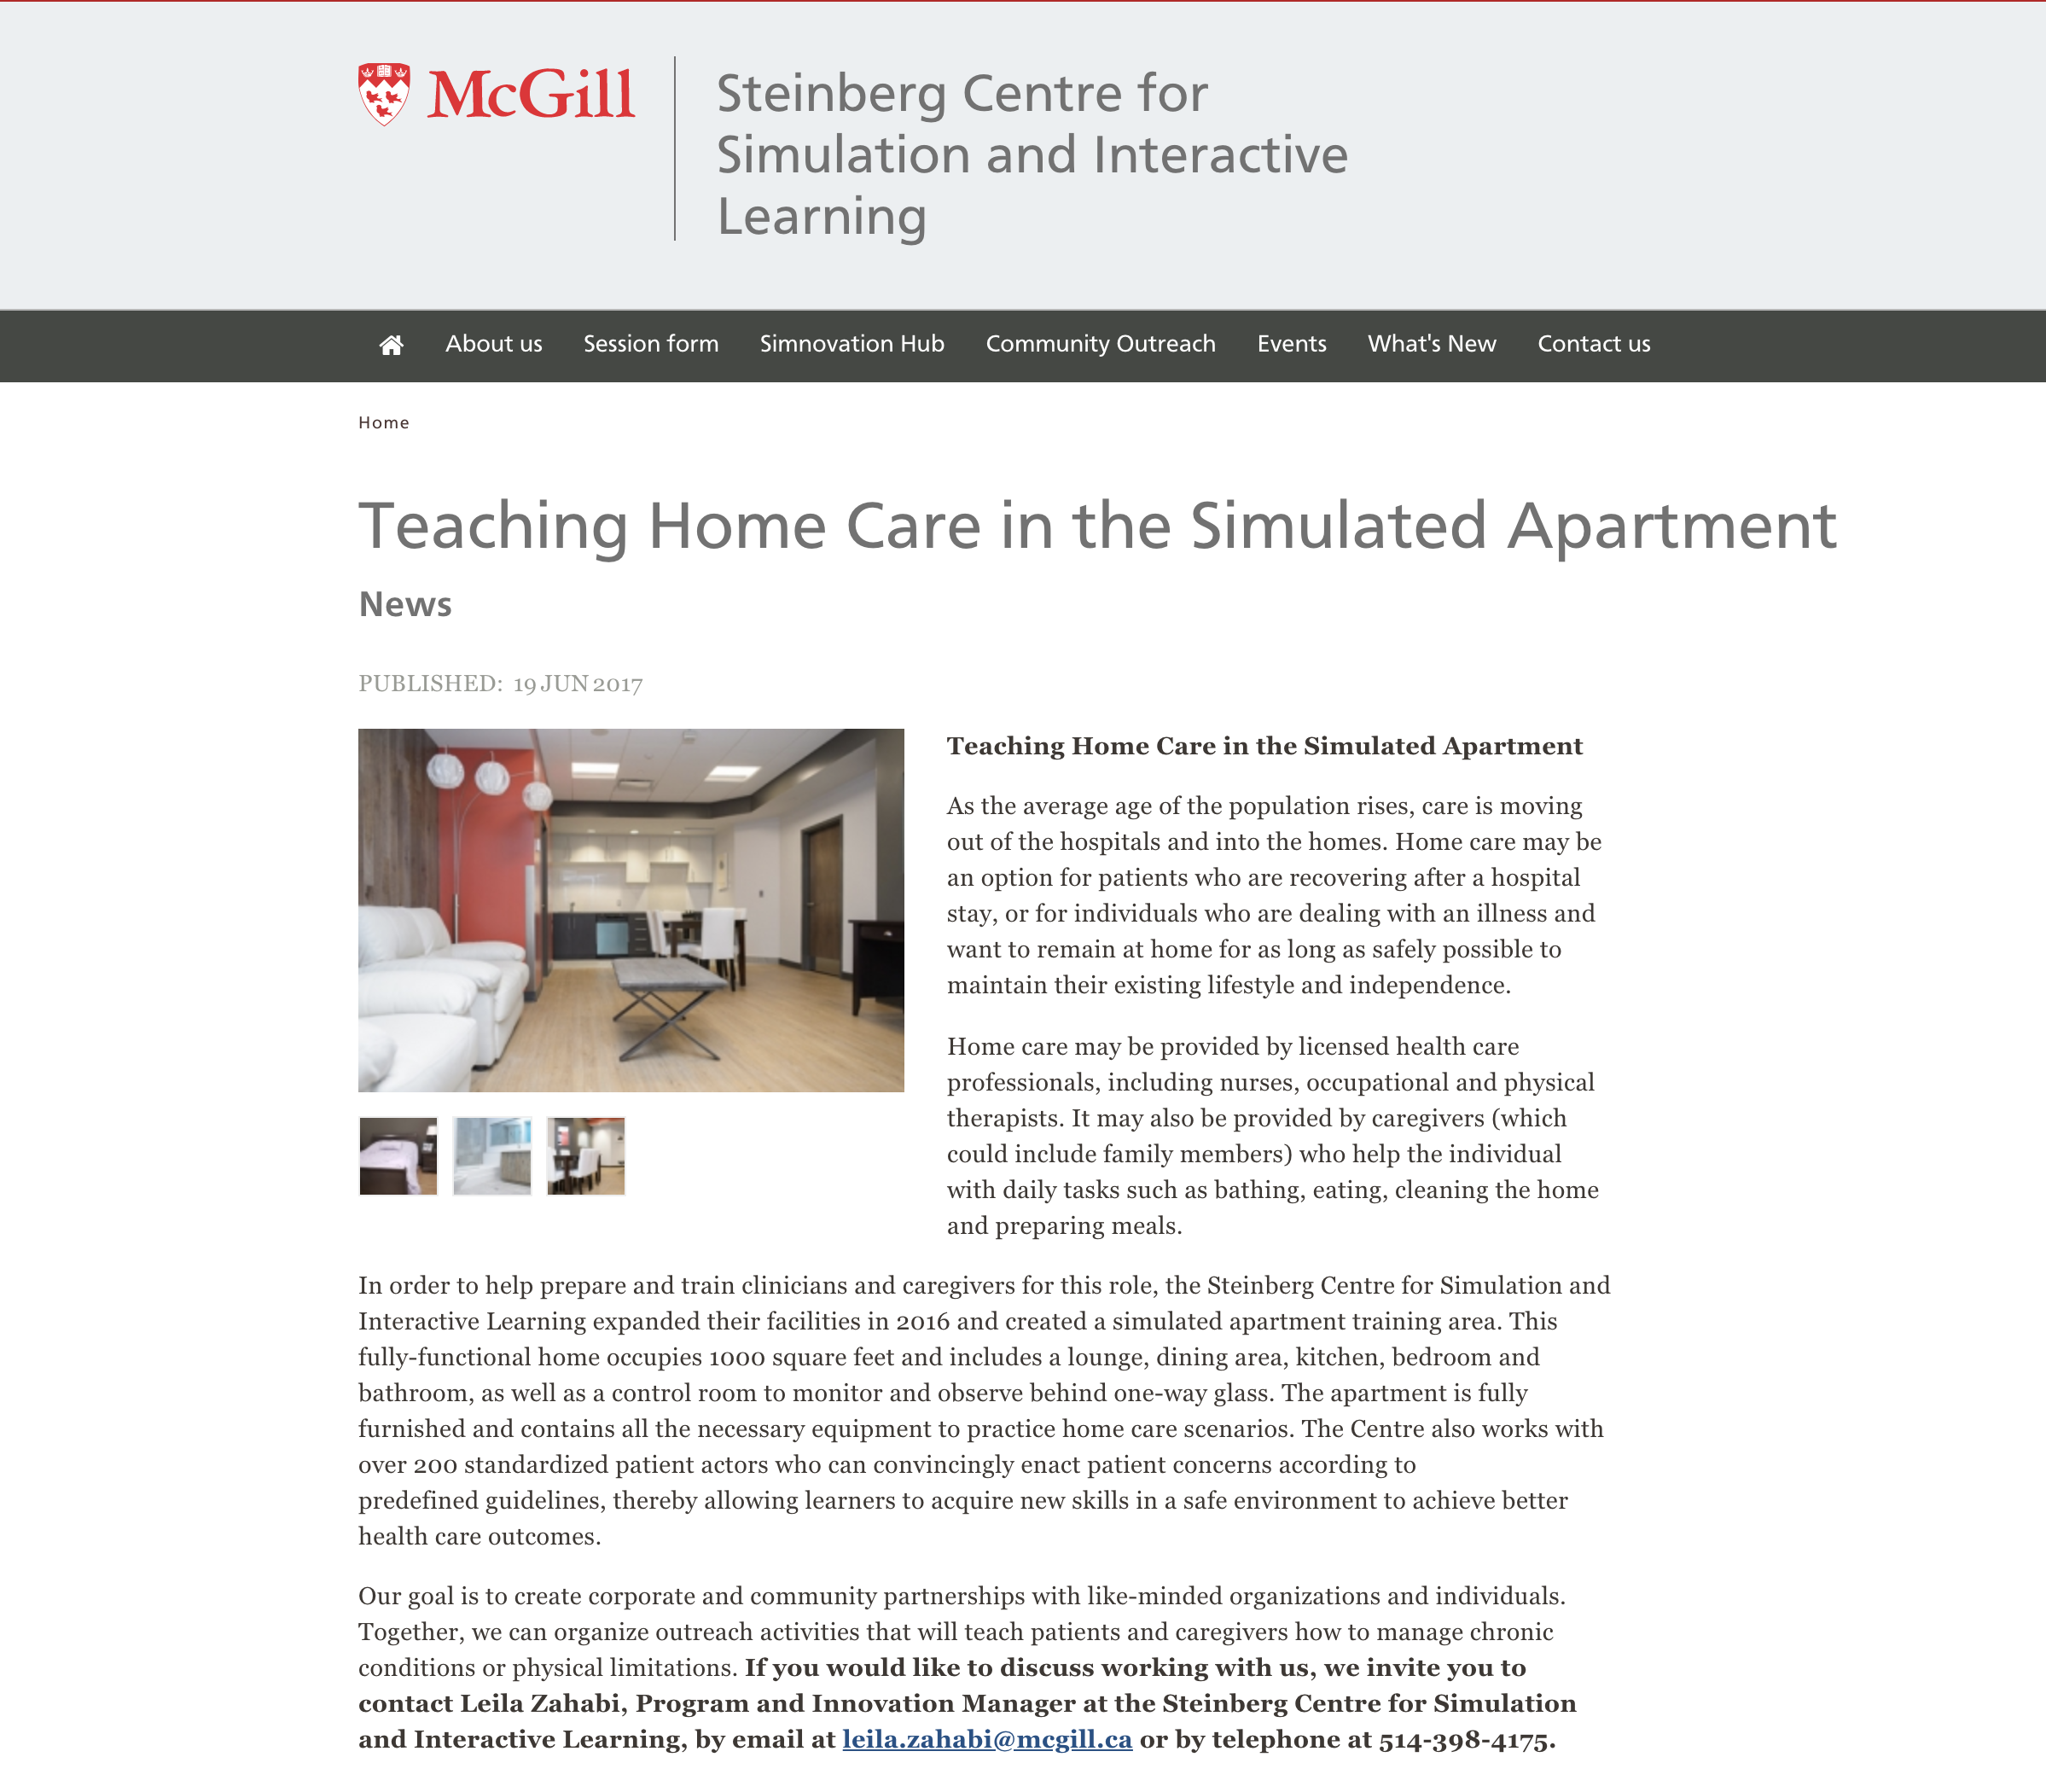 McGill - Steinberg Centre for Simulation and Interactive Learning - June 2017